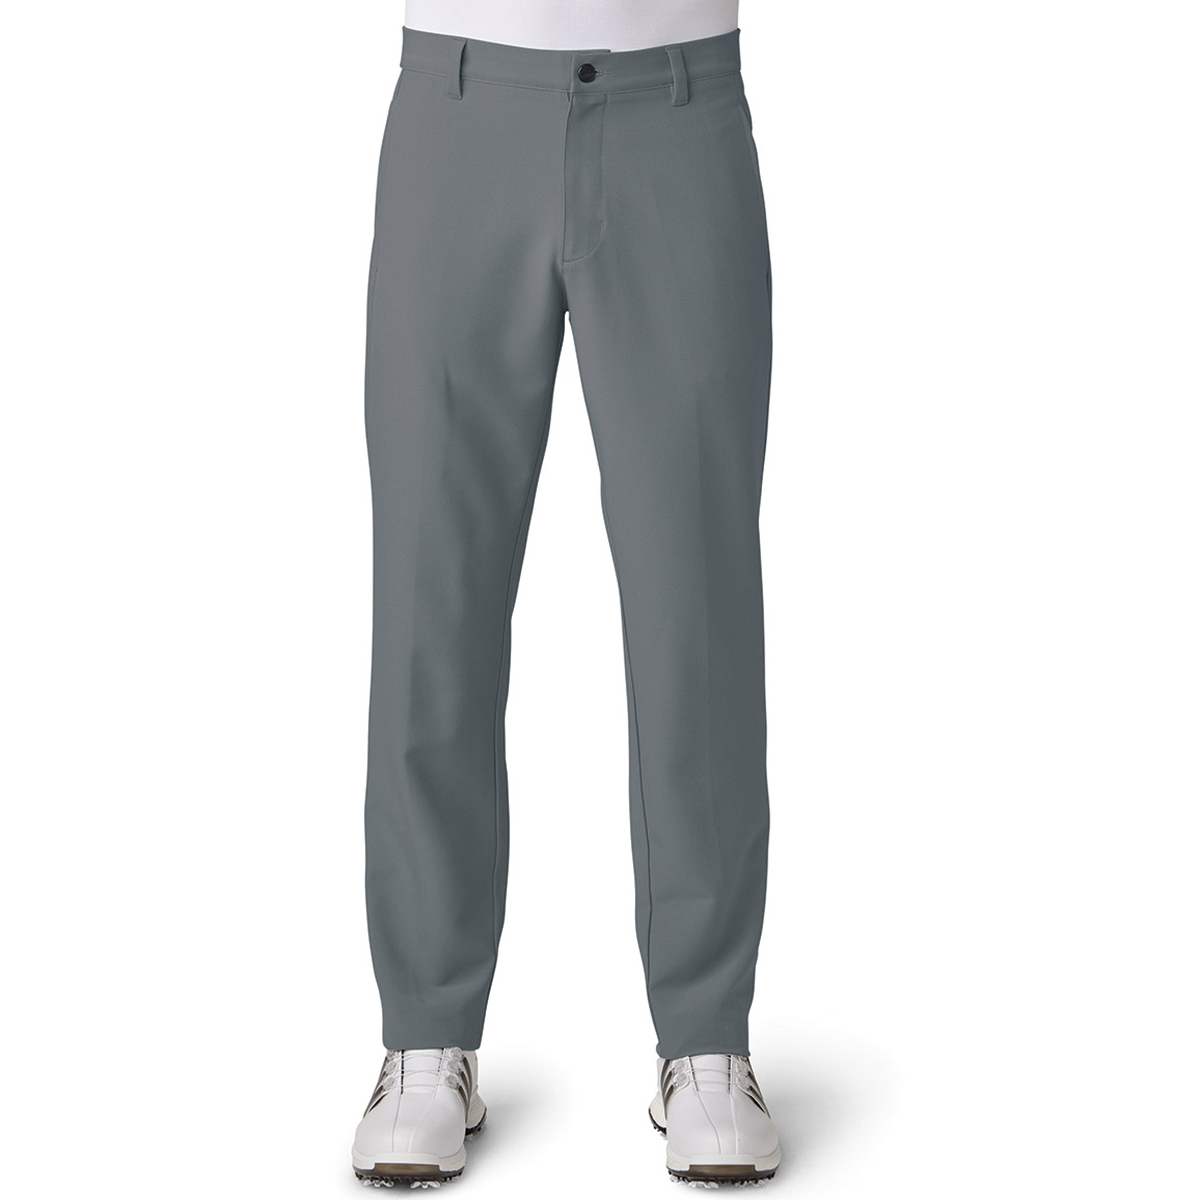 adidas ultimate 3 stripe trousers